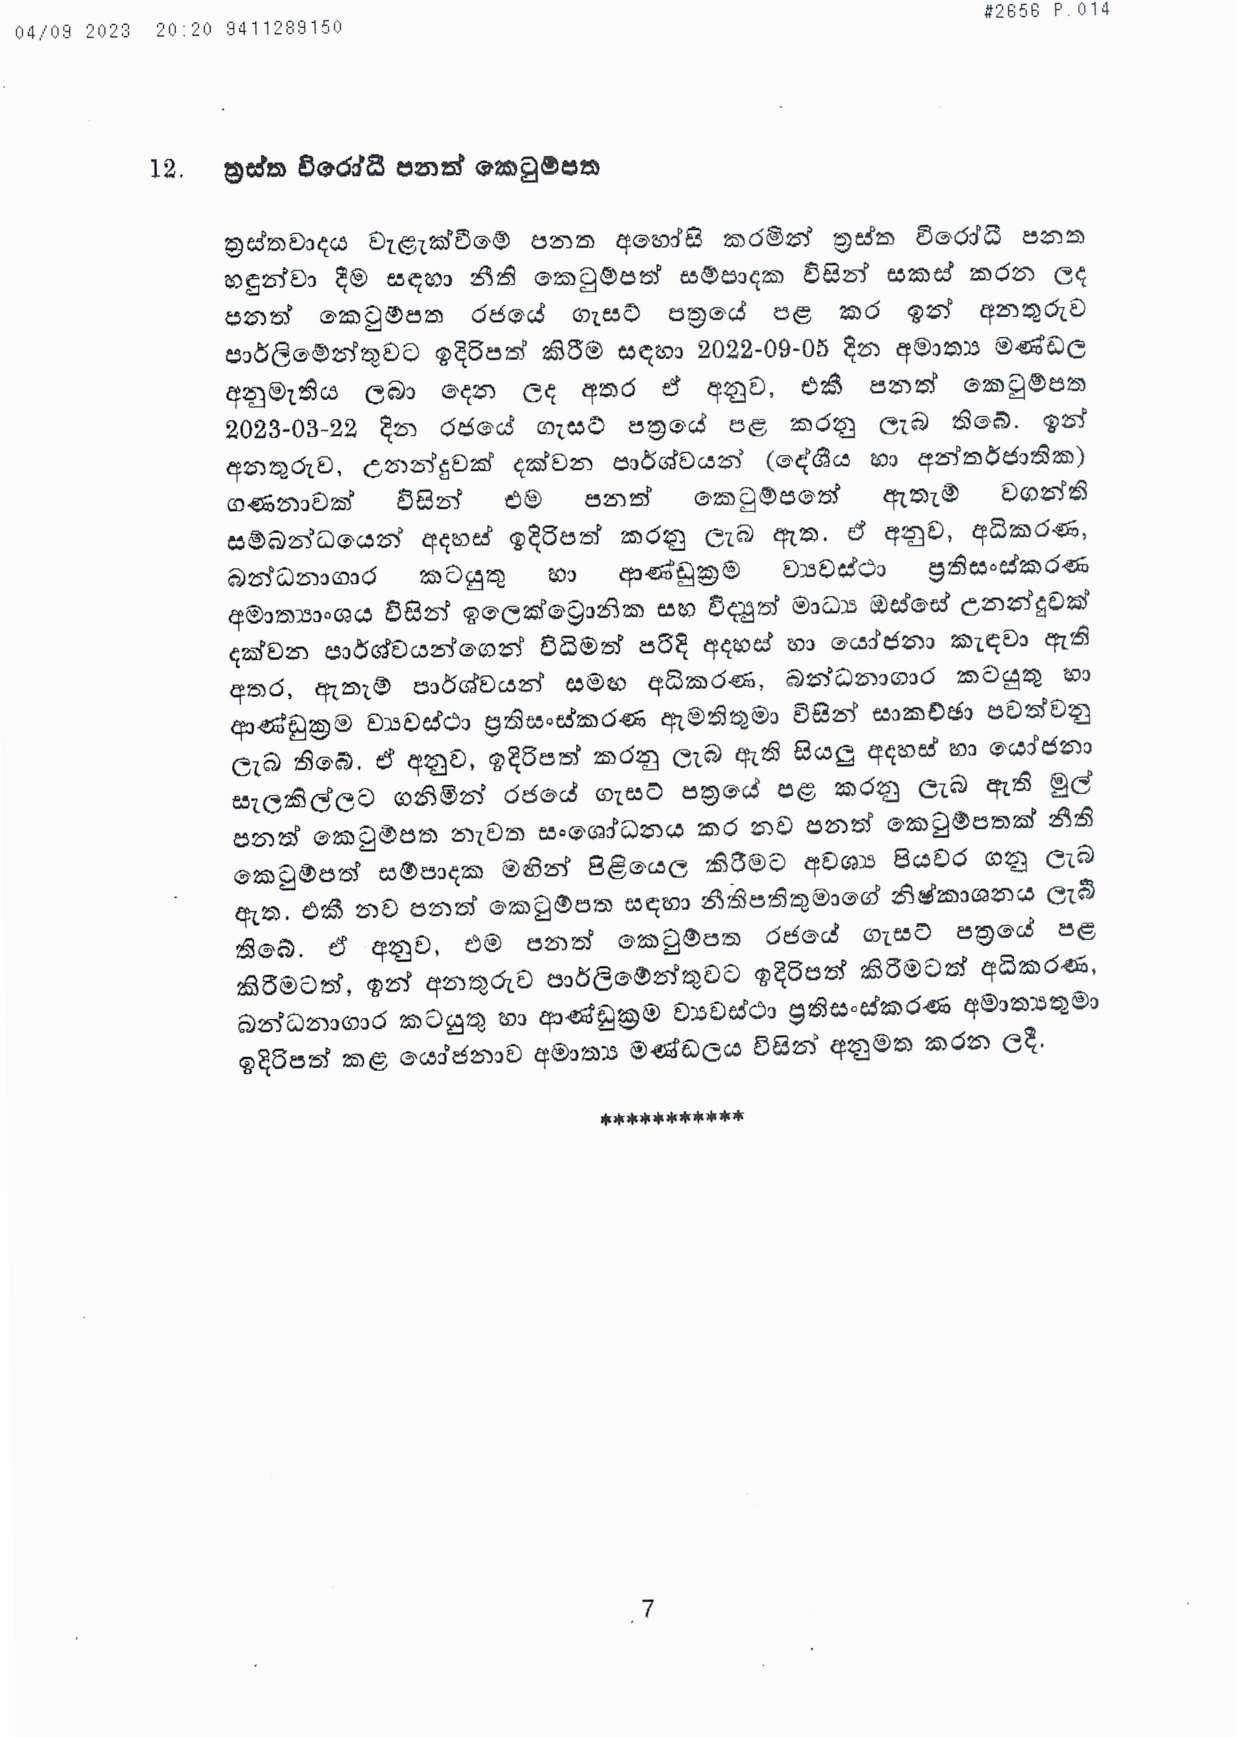 Cabinet Decision on 04.09.2023 page 007